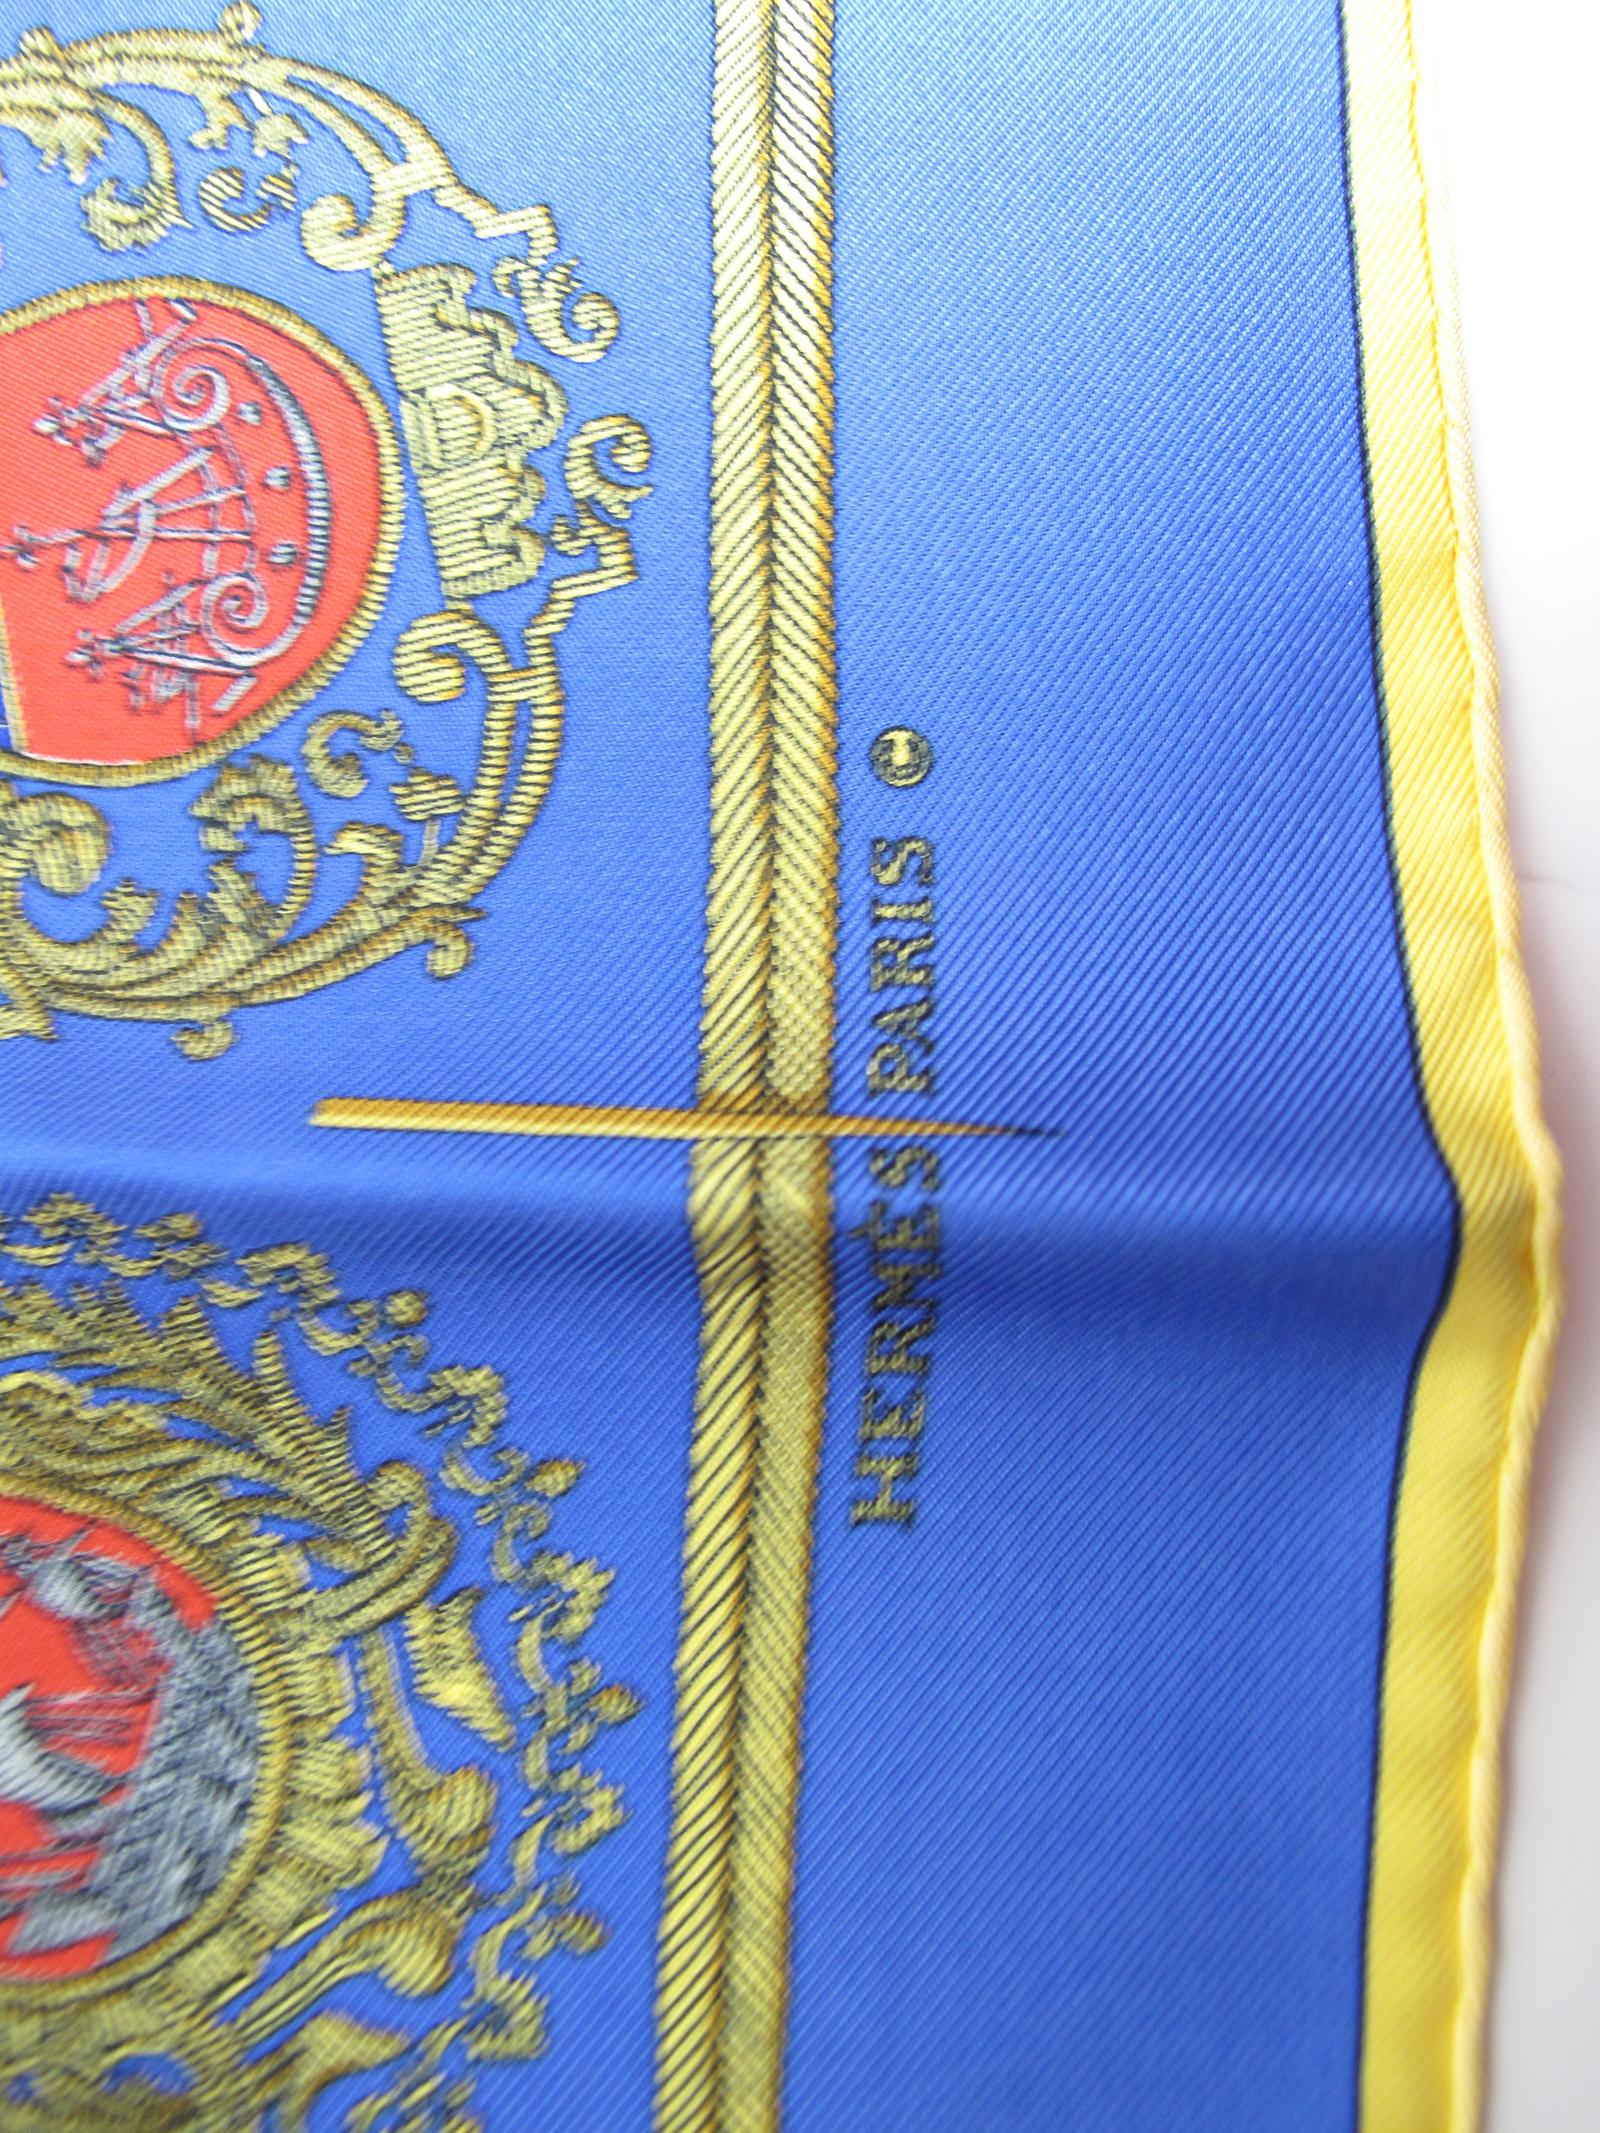 Hermes silk scarf with Paris coat of Arms and Latin Phrase Fluctuat nec mergitur.  condition: Excellent.  17